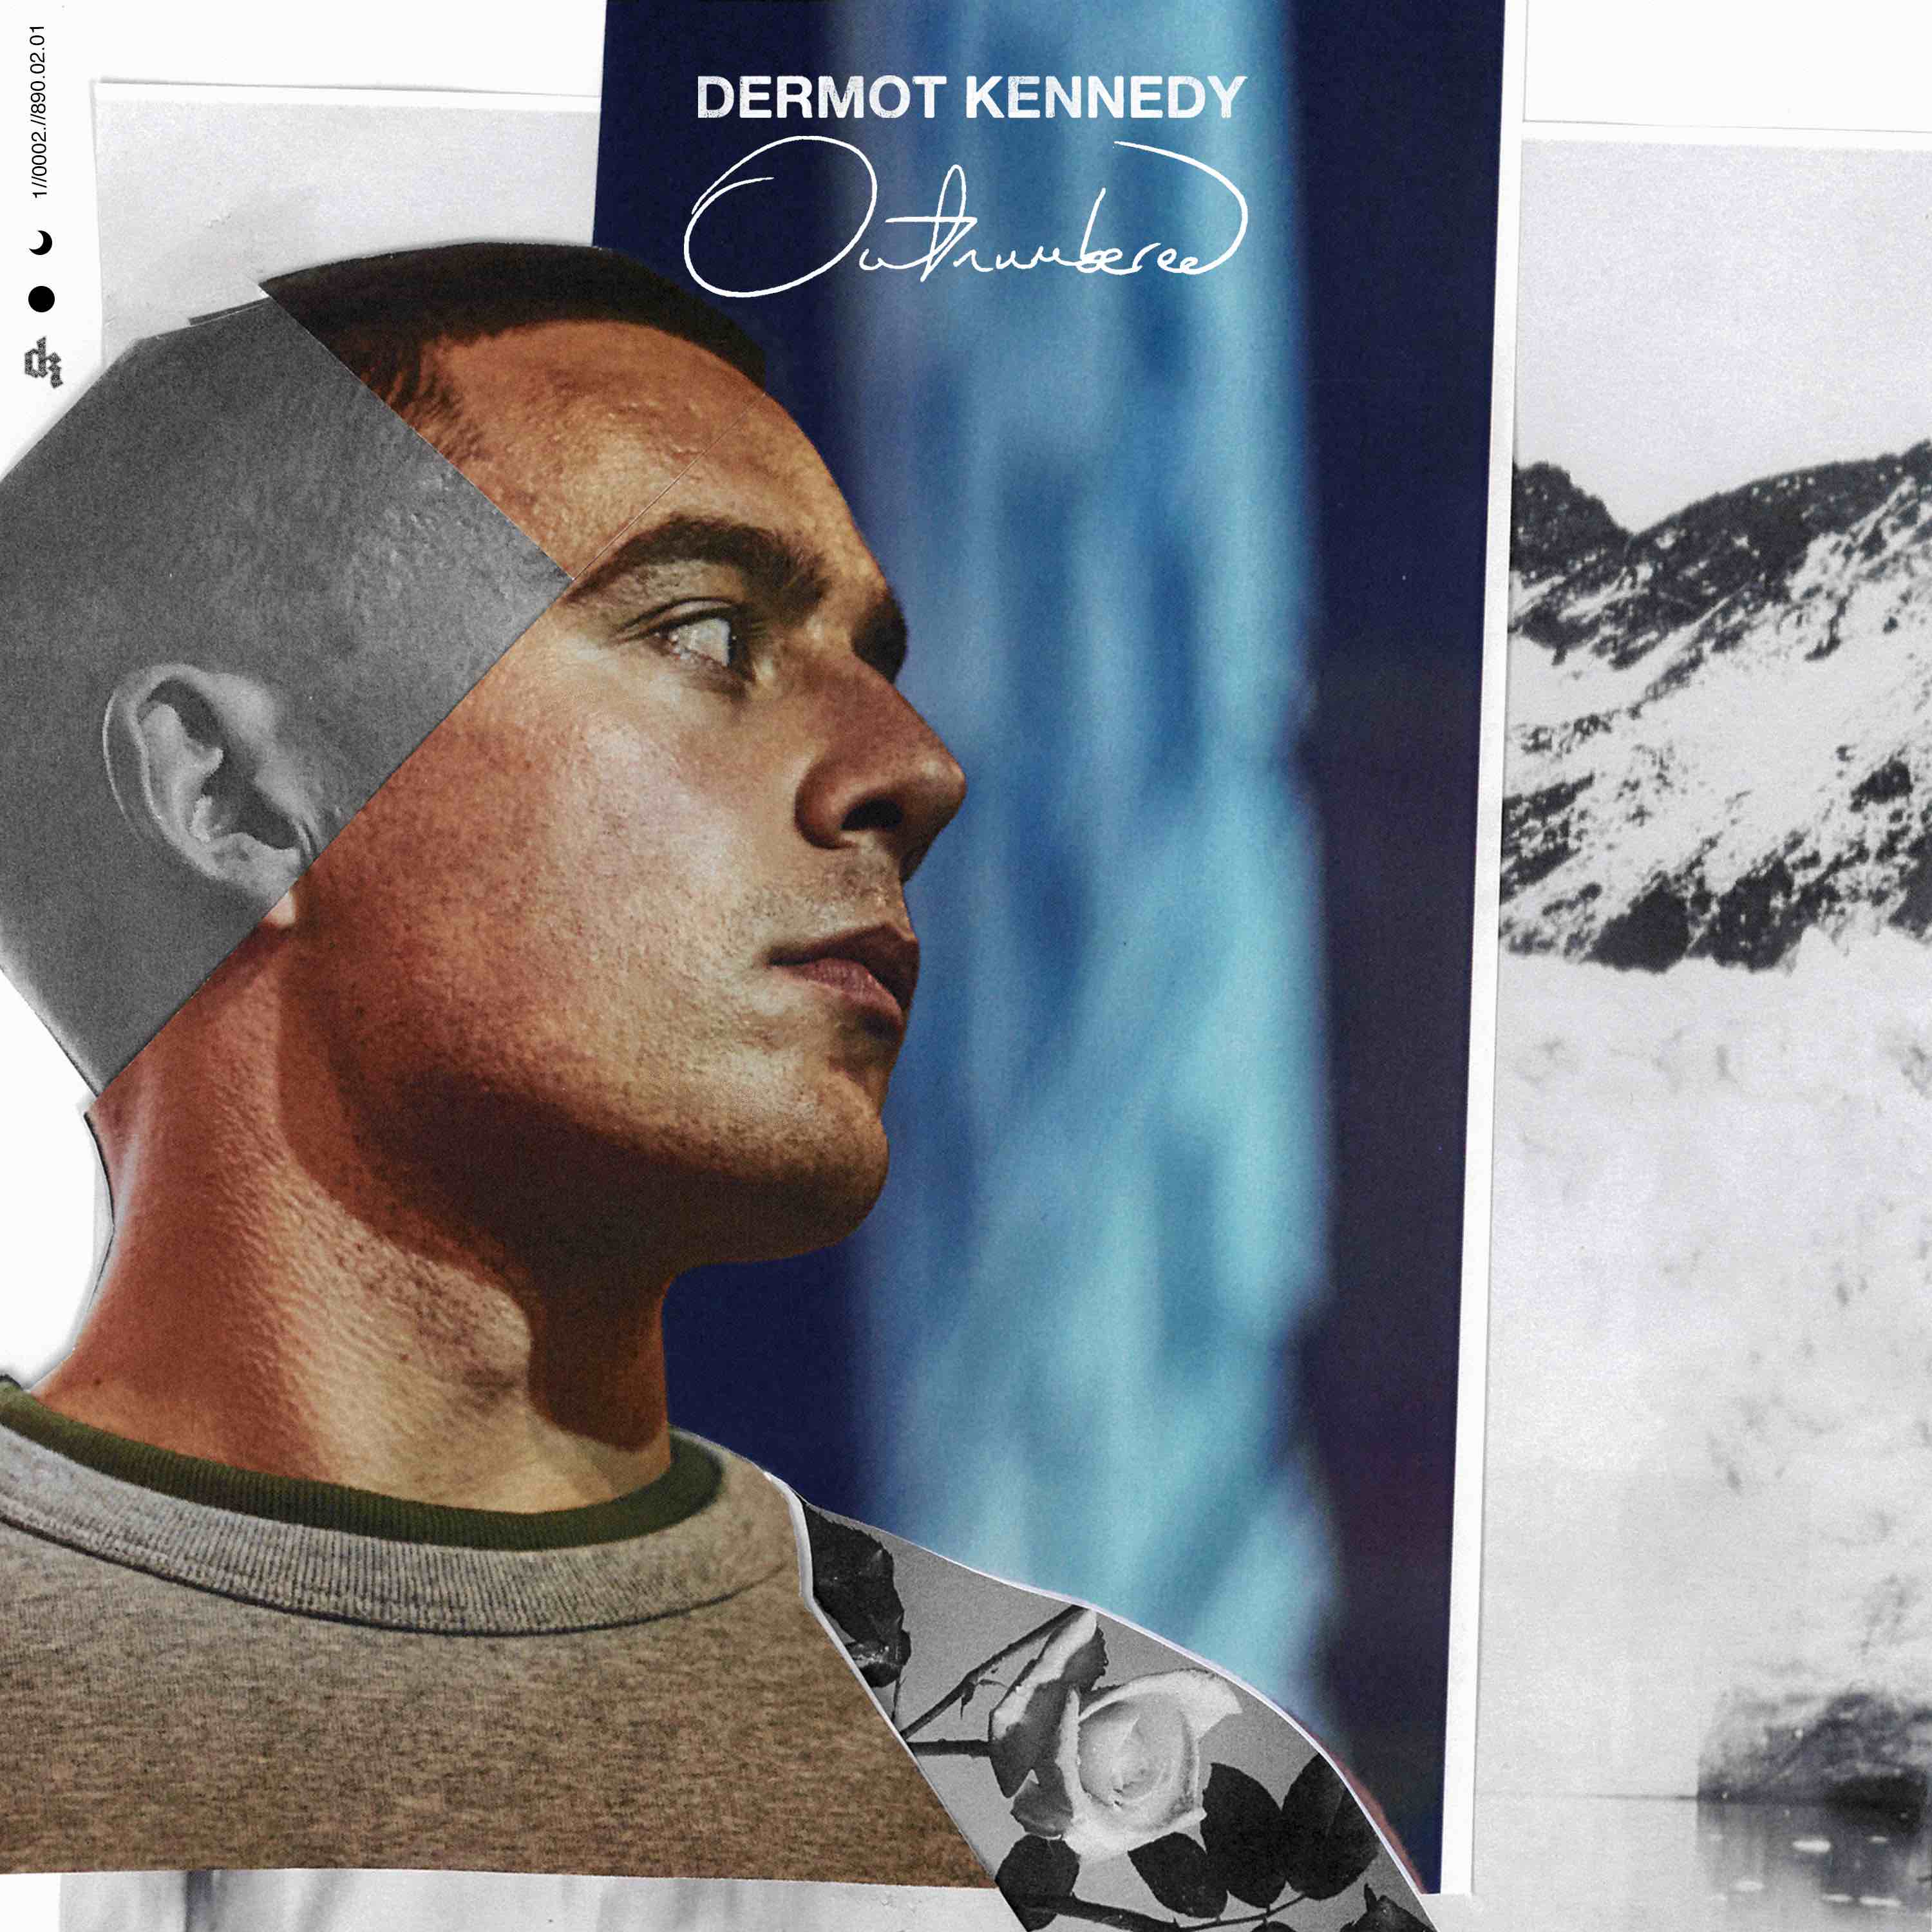 Dermot Kennedy - "Outnumbered"